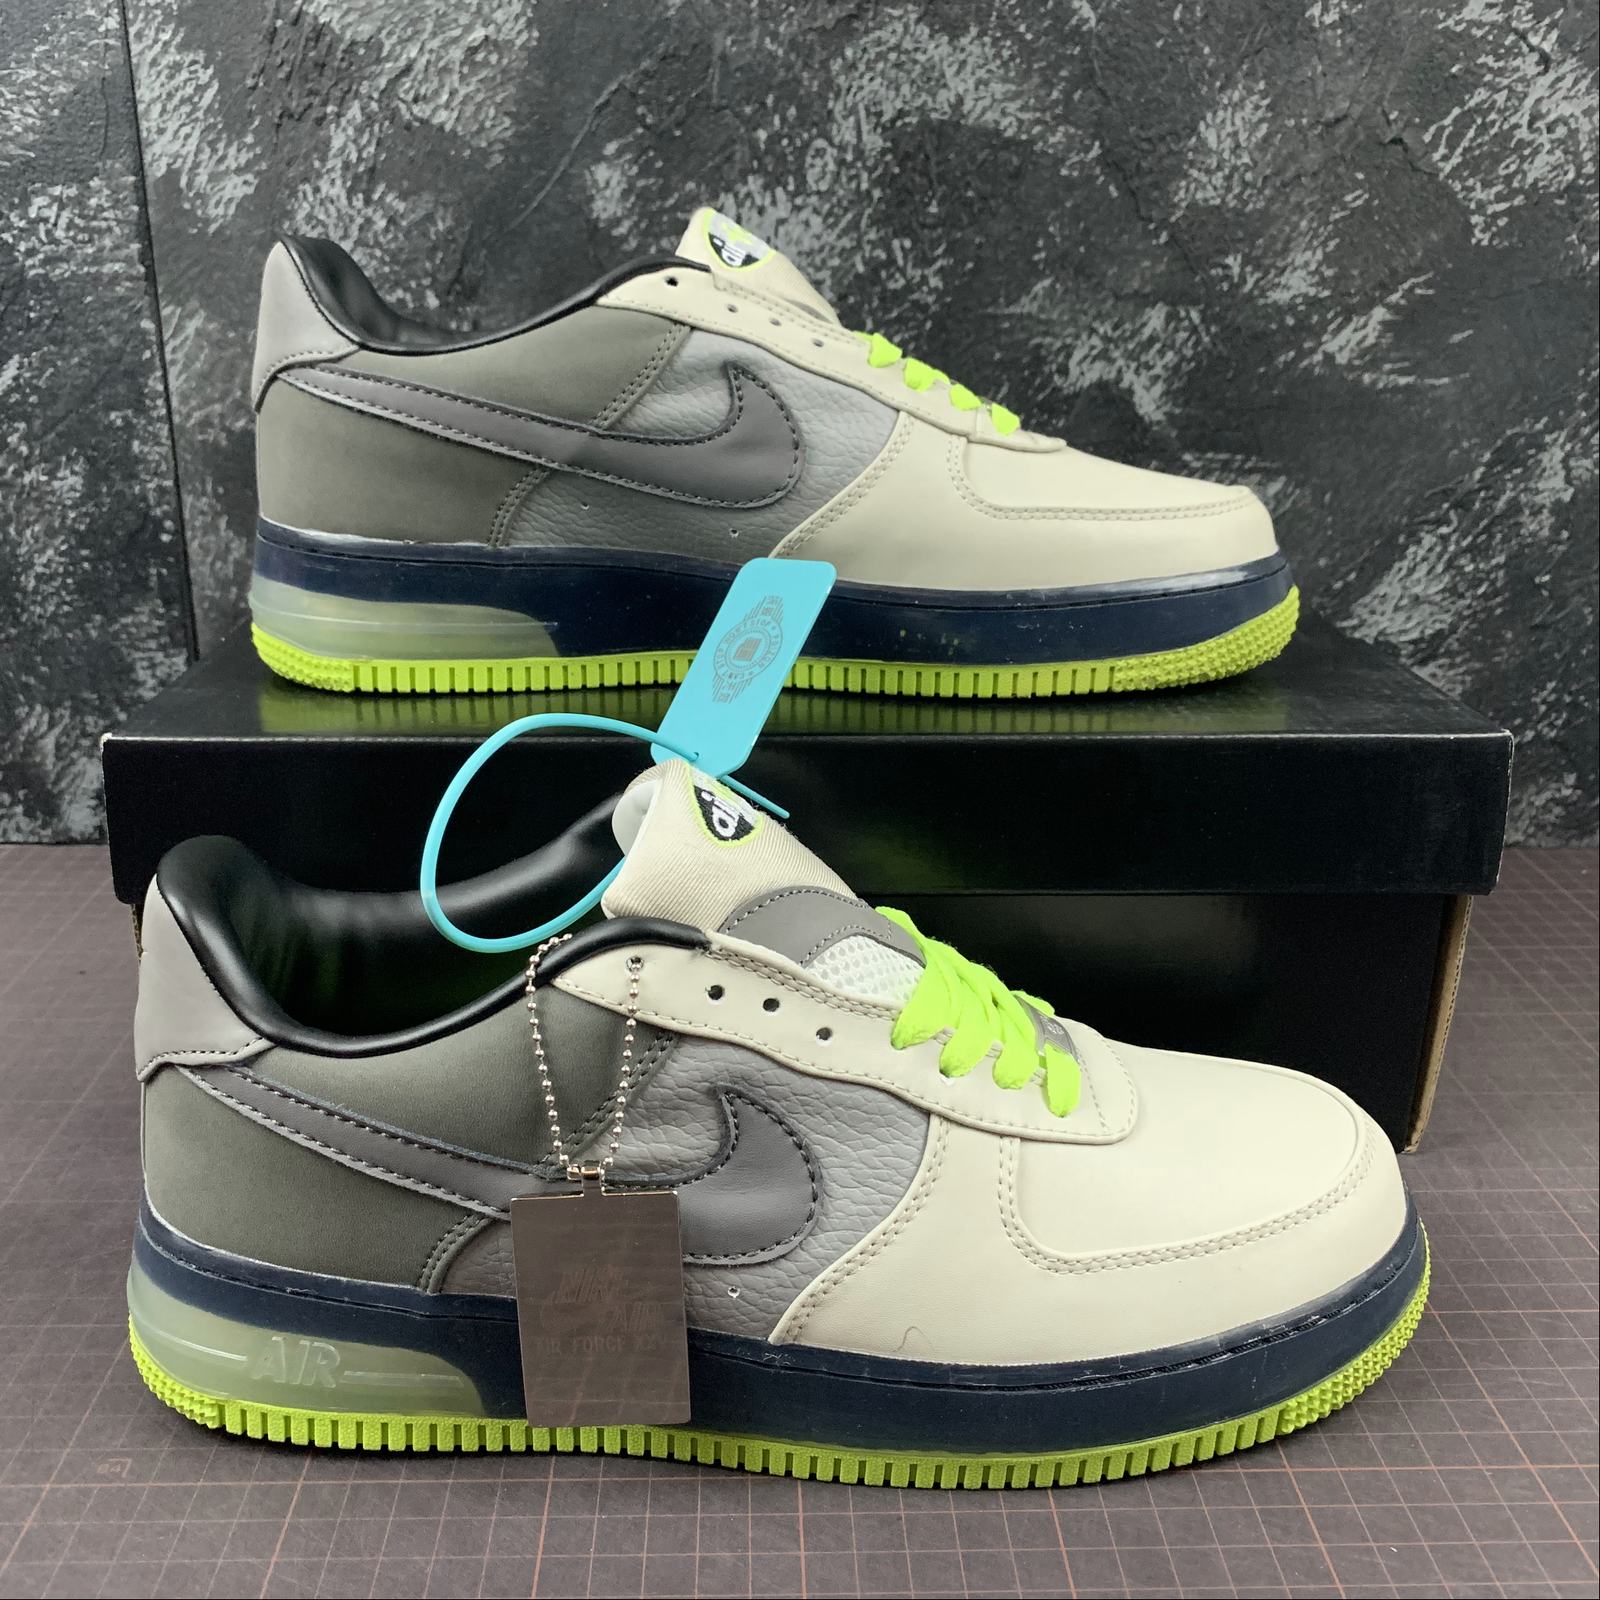 air force 1 low neon